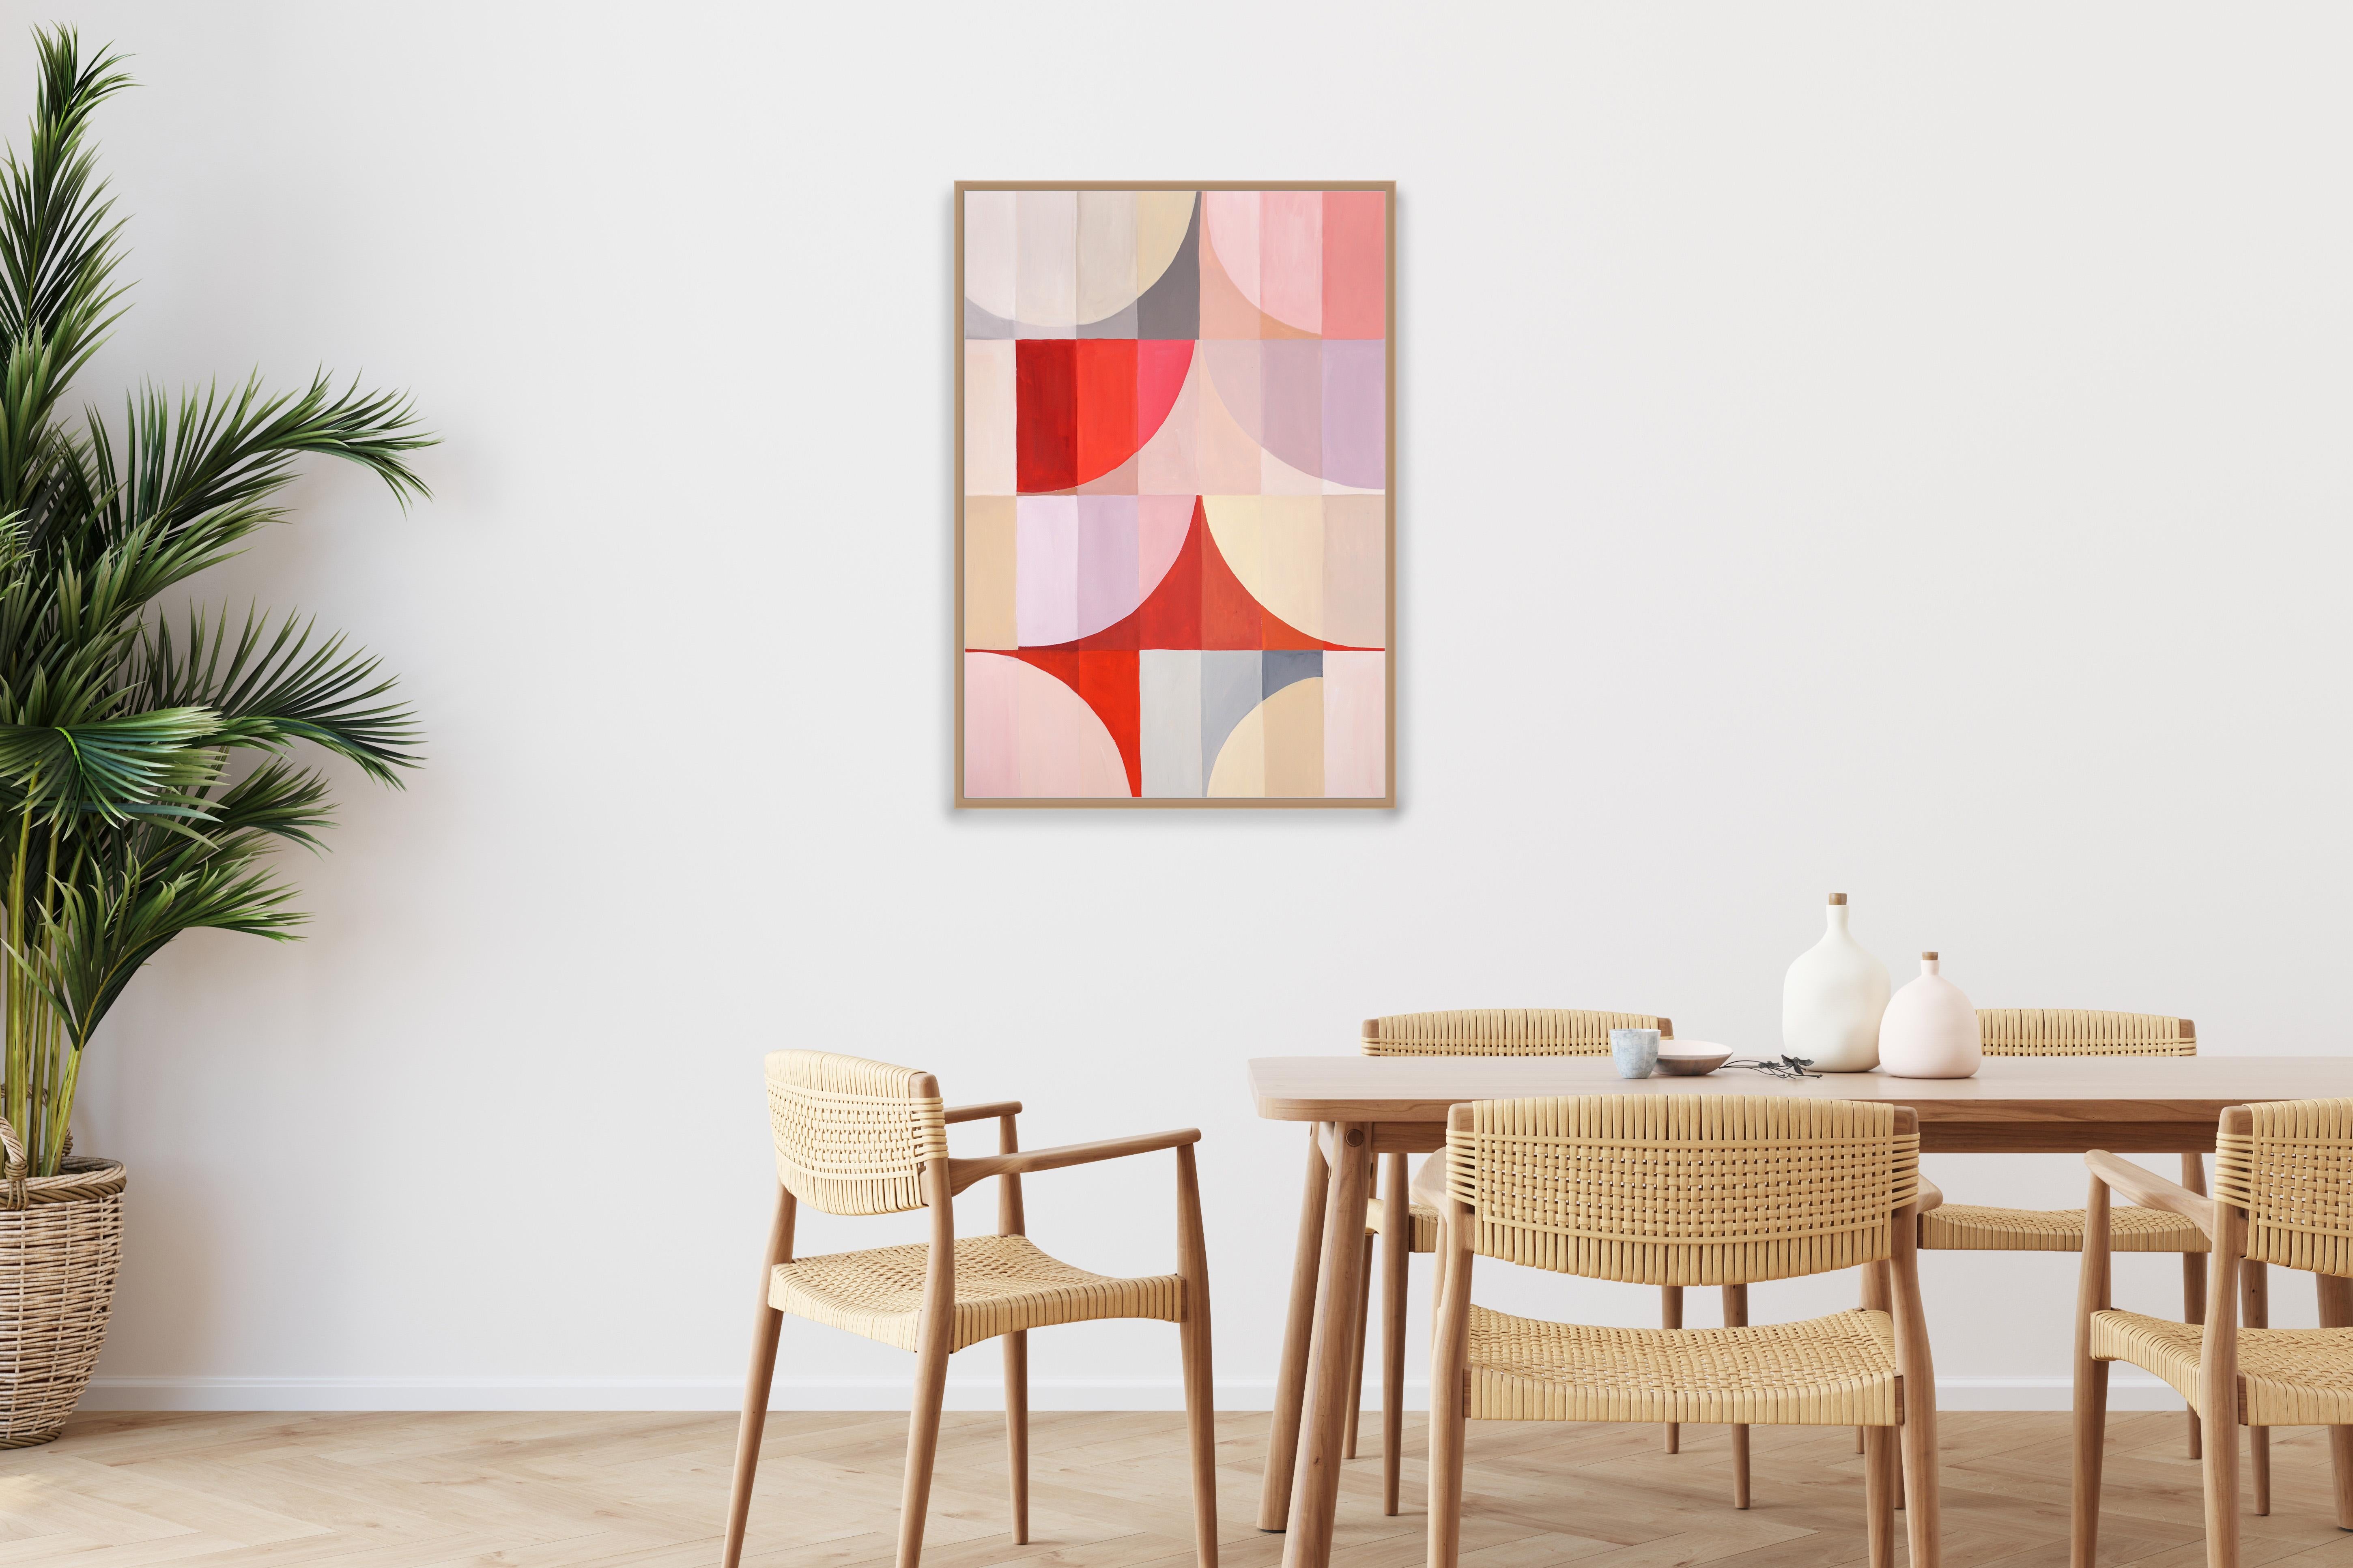 Behind the Real Curtains, Bauhaus Pattern Grid, Pastel Pink, Mauve, Geometric  - Painting by Natalia Roman